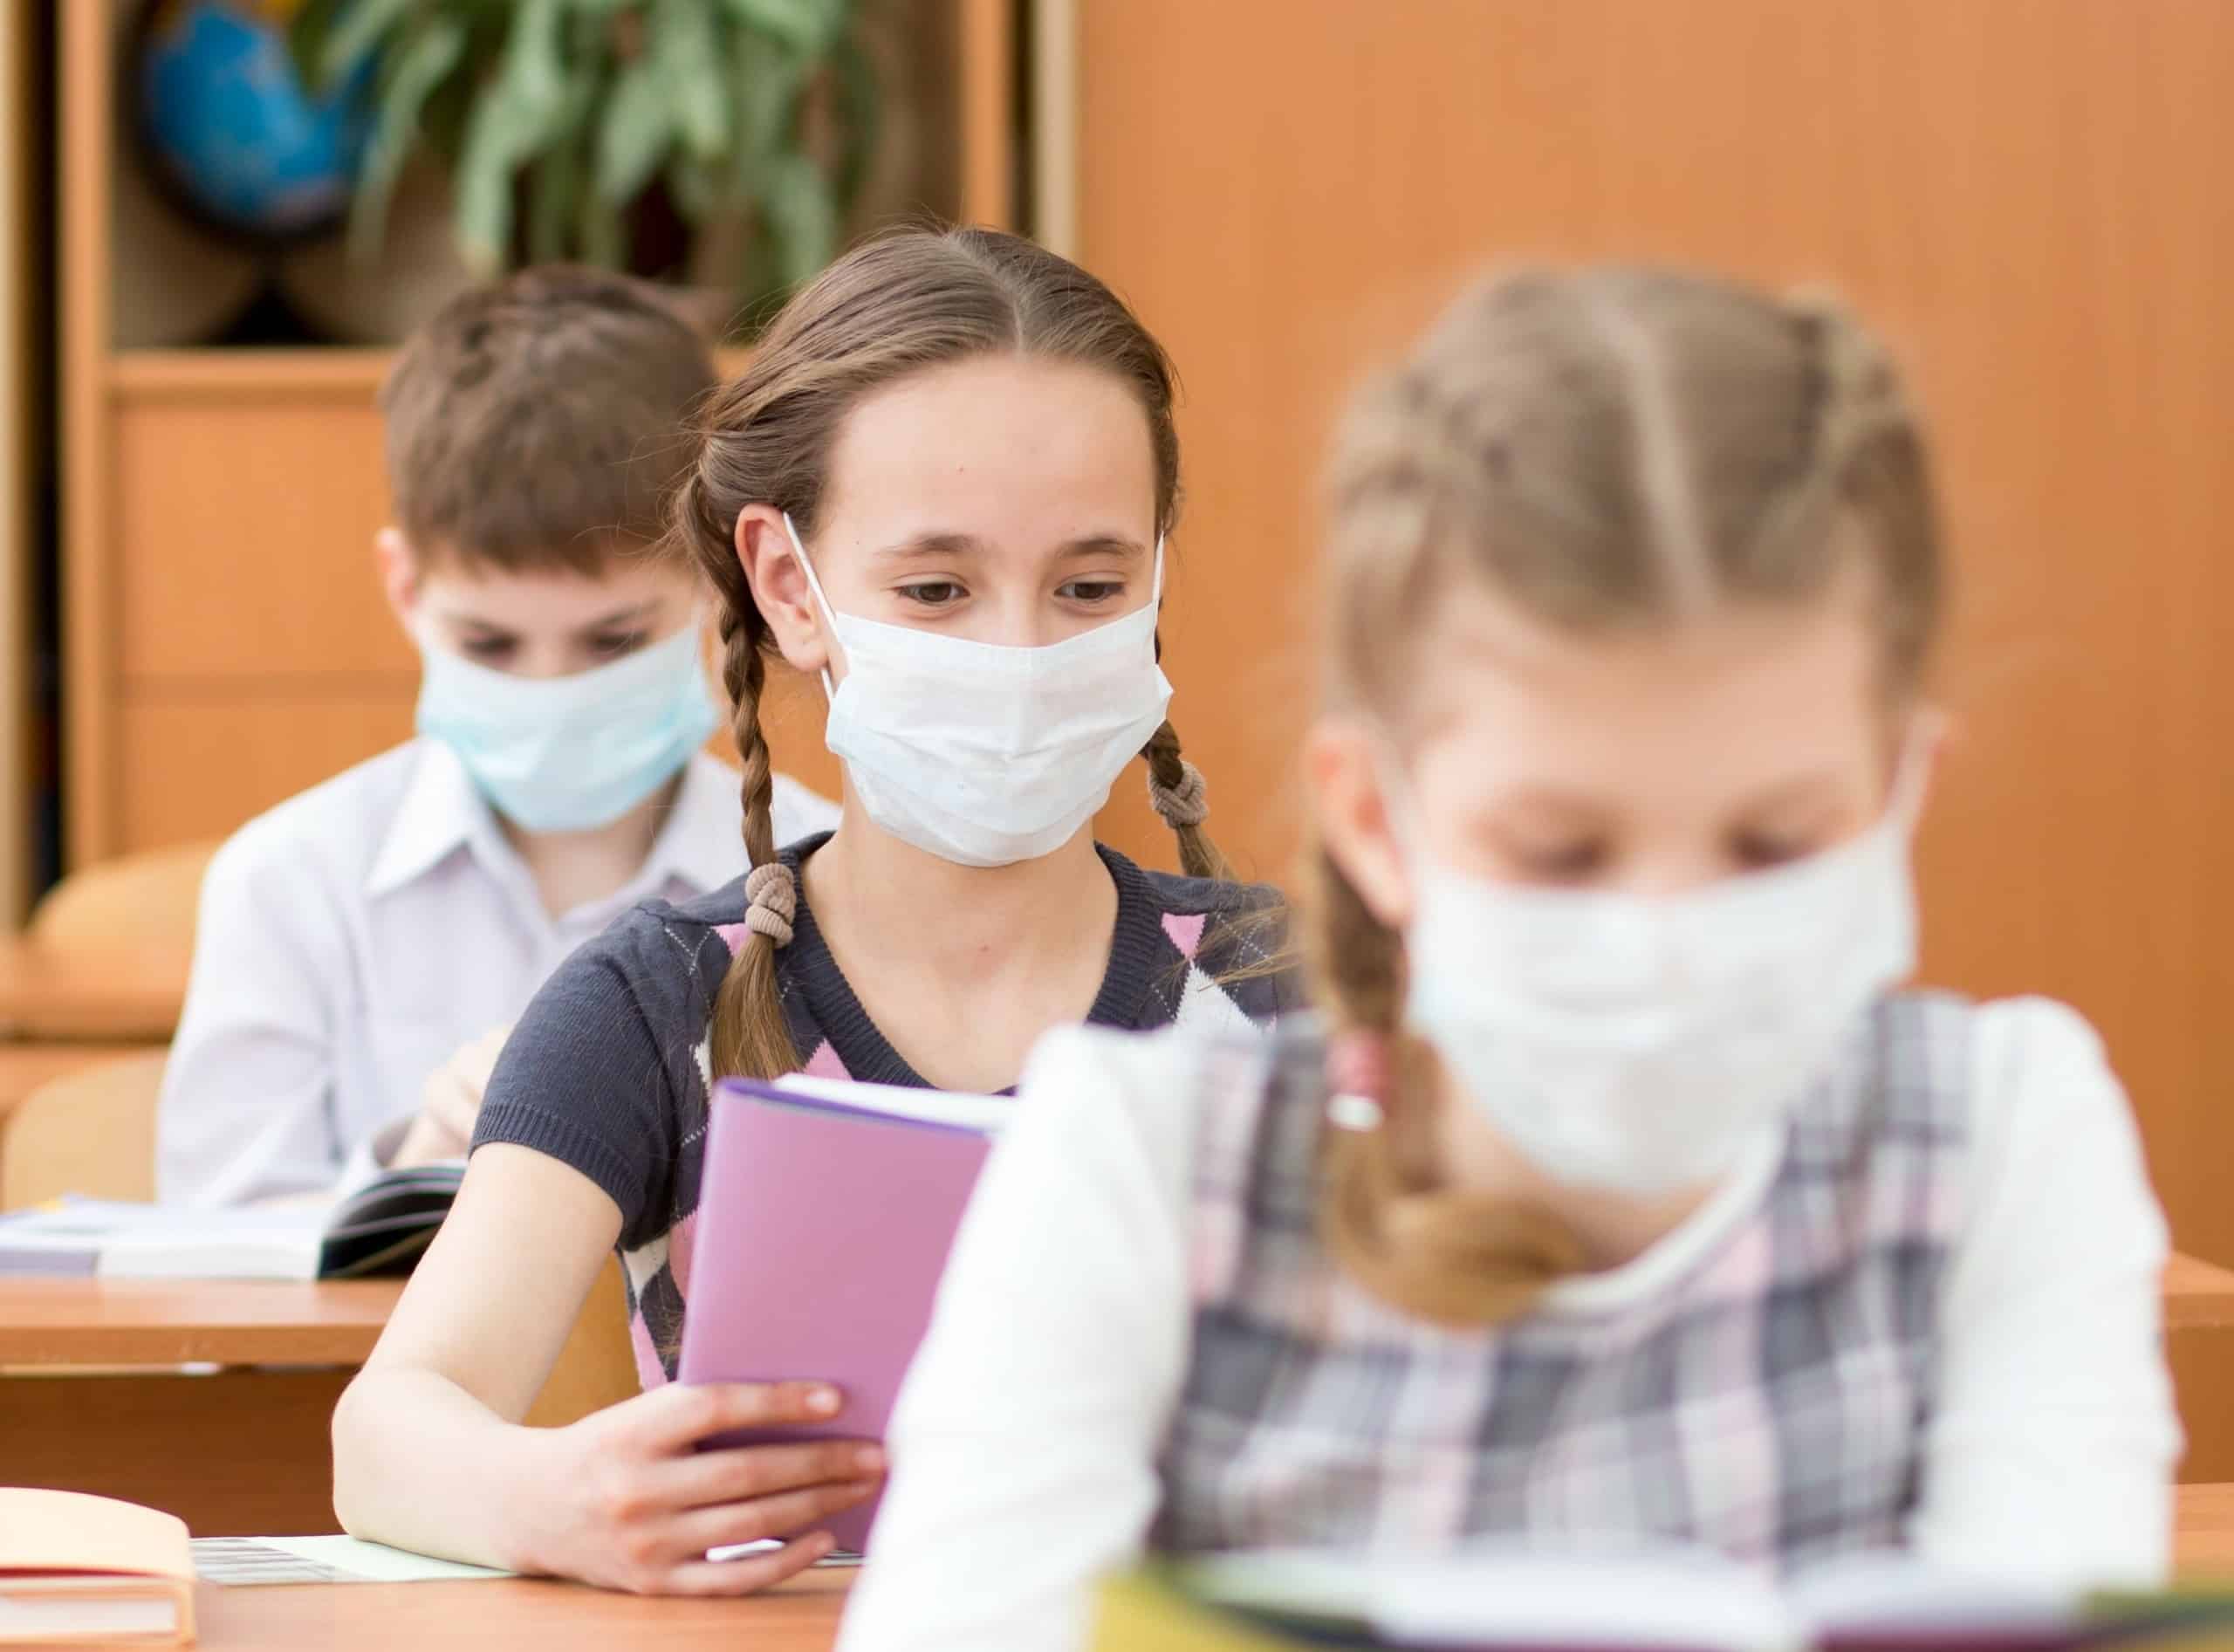 Schoolkids with medicine mask on faces against virus in classroom; keeping reading social while distancing